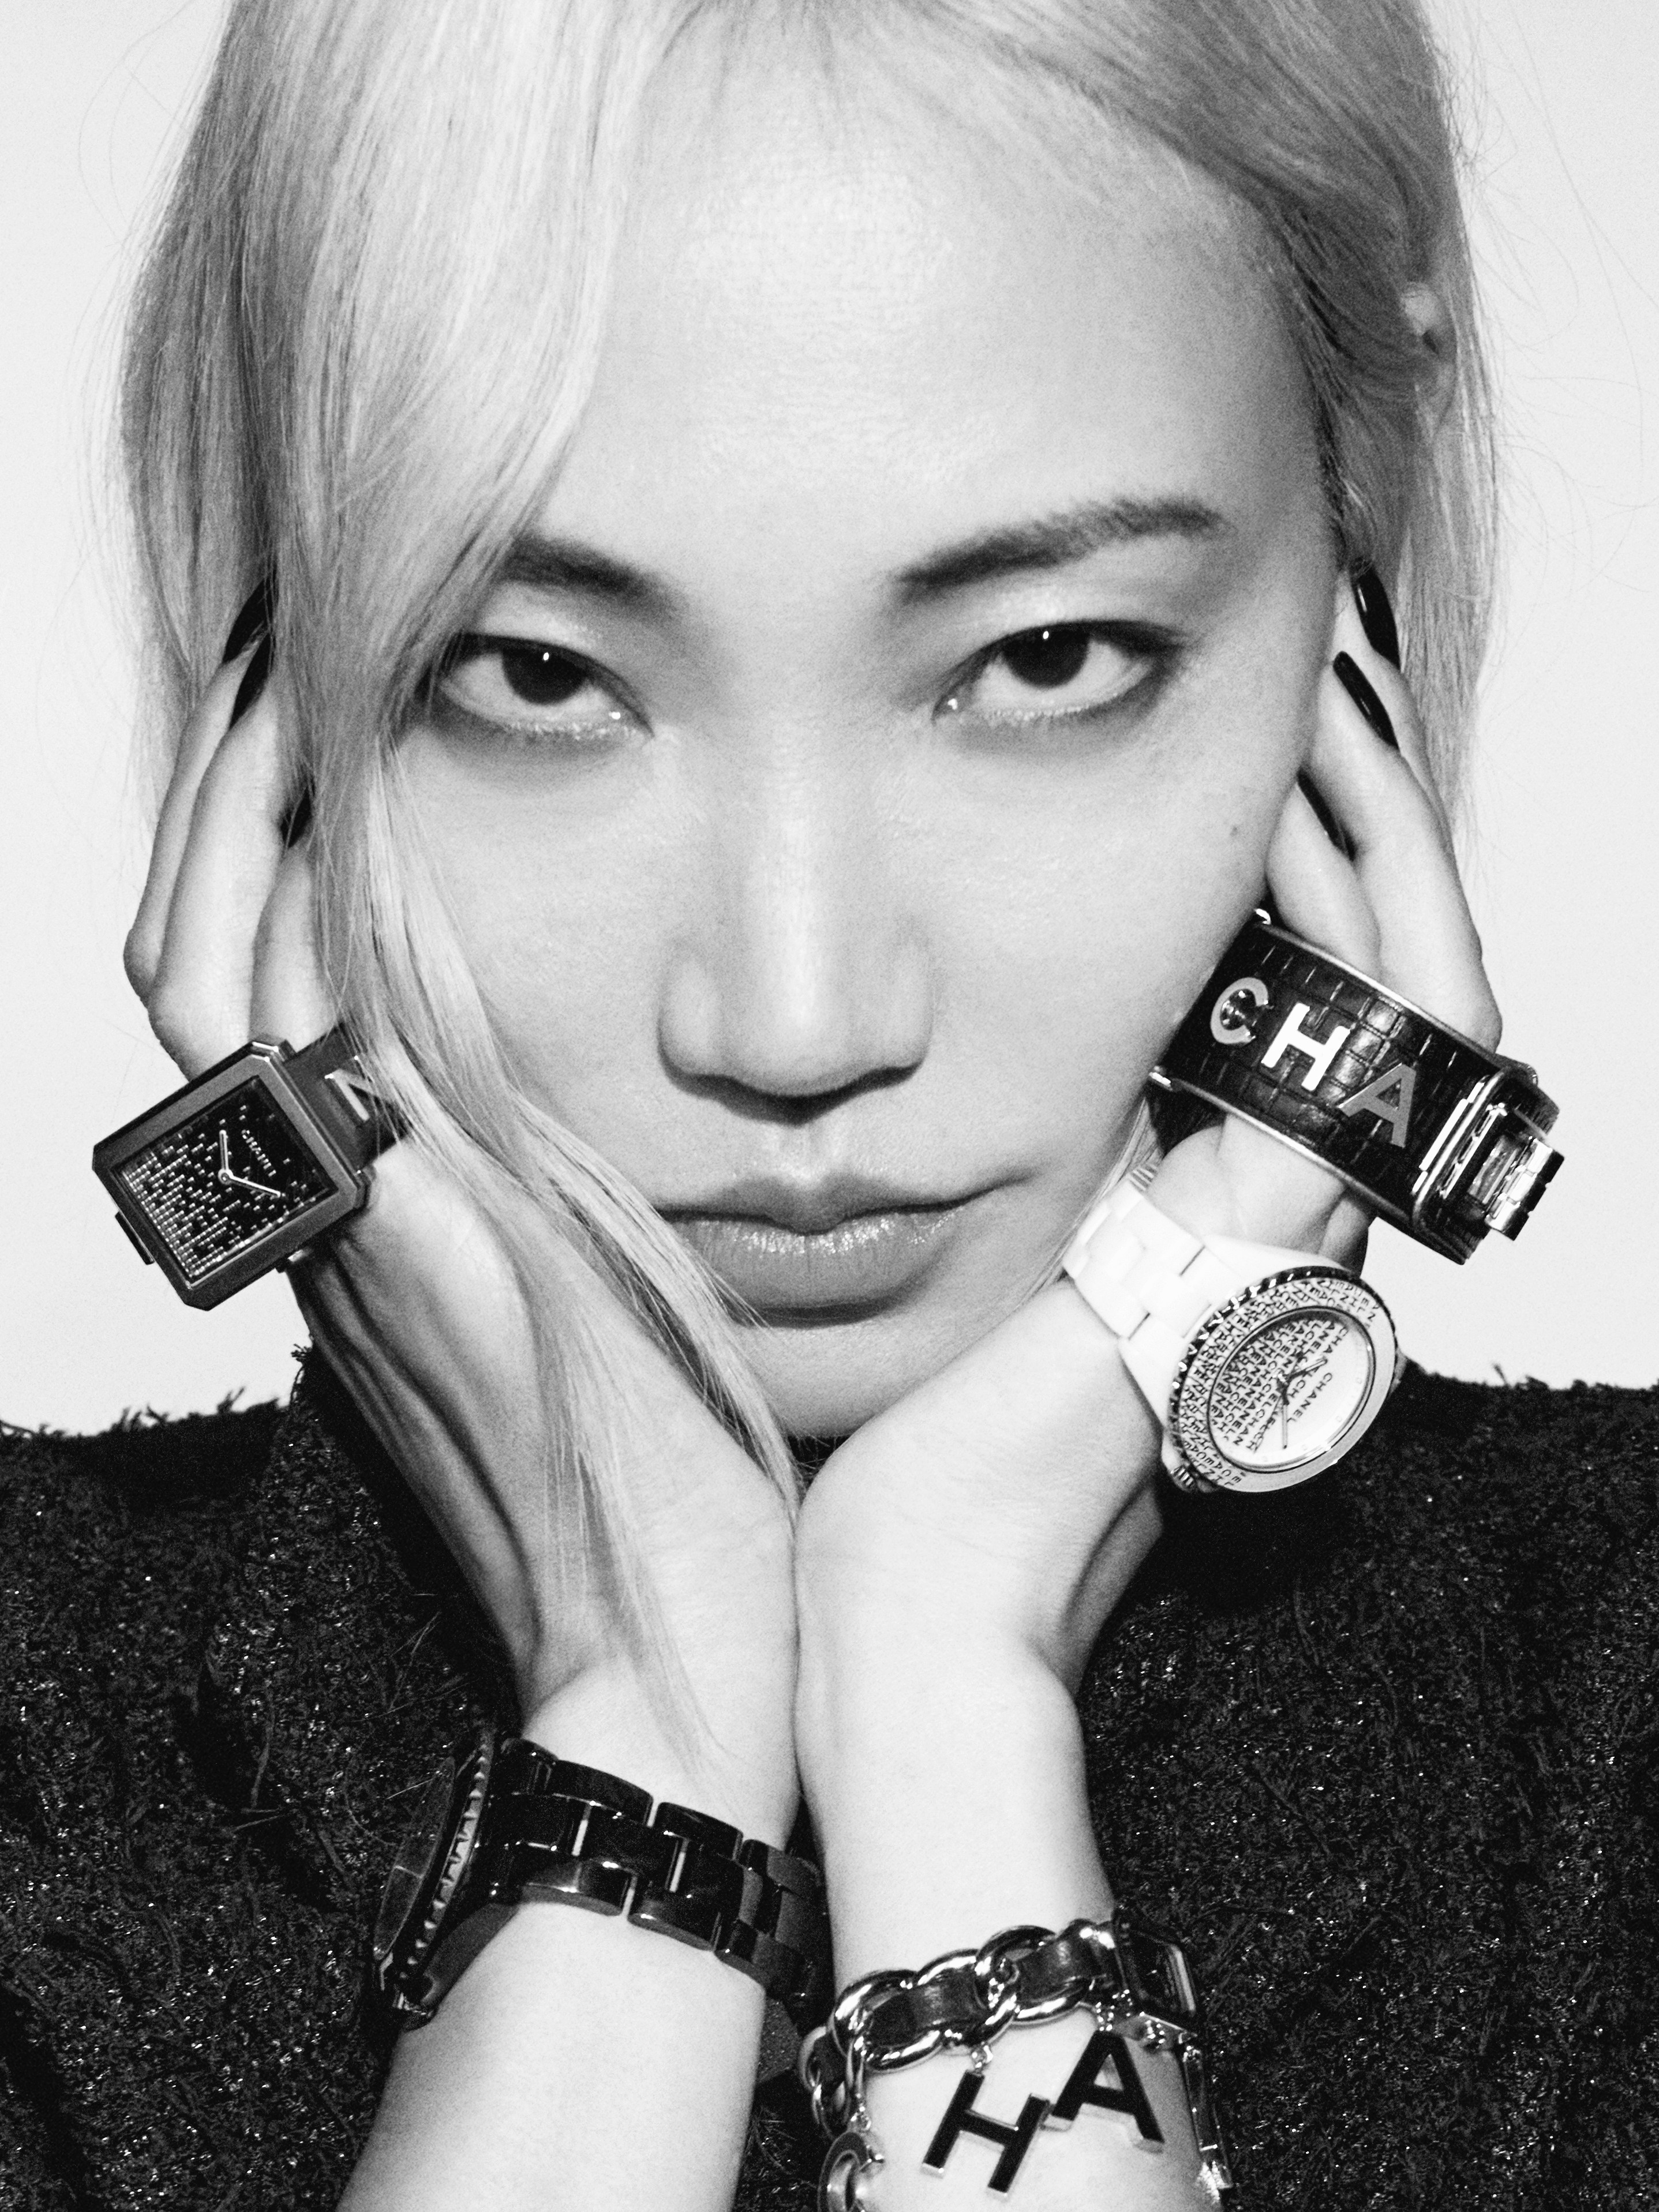 Armed with options: Chanel today offers women everything from matt black ceramic timepieces to secret watches. Photo: Chanel